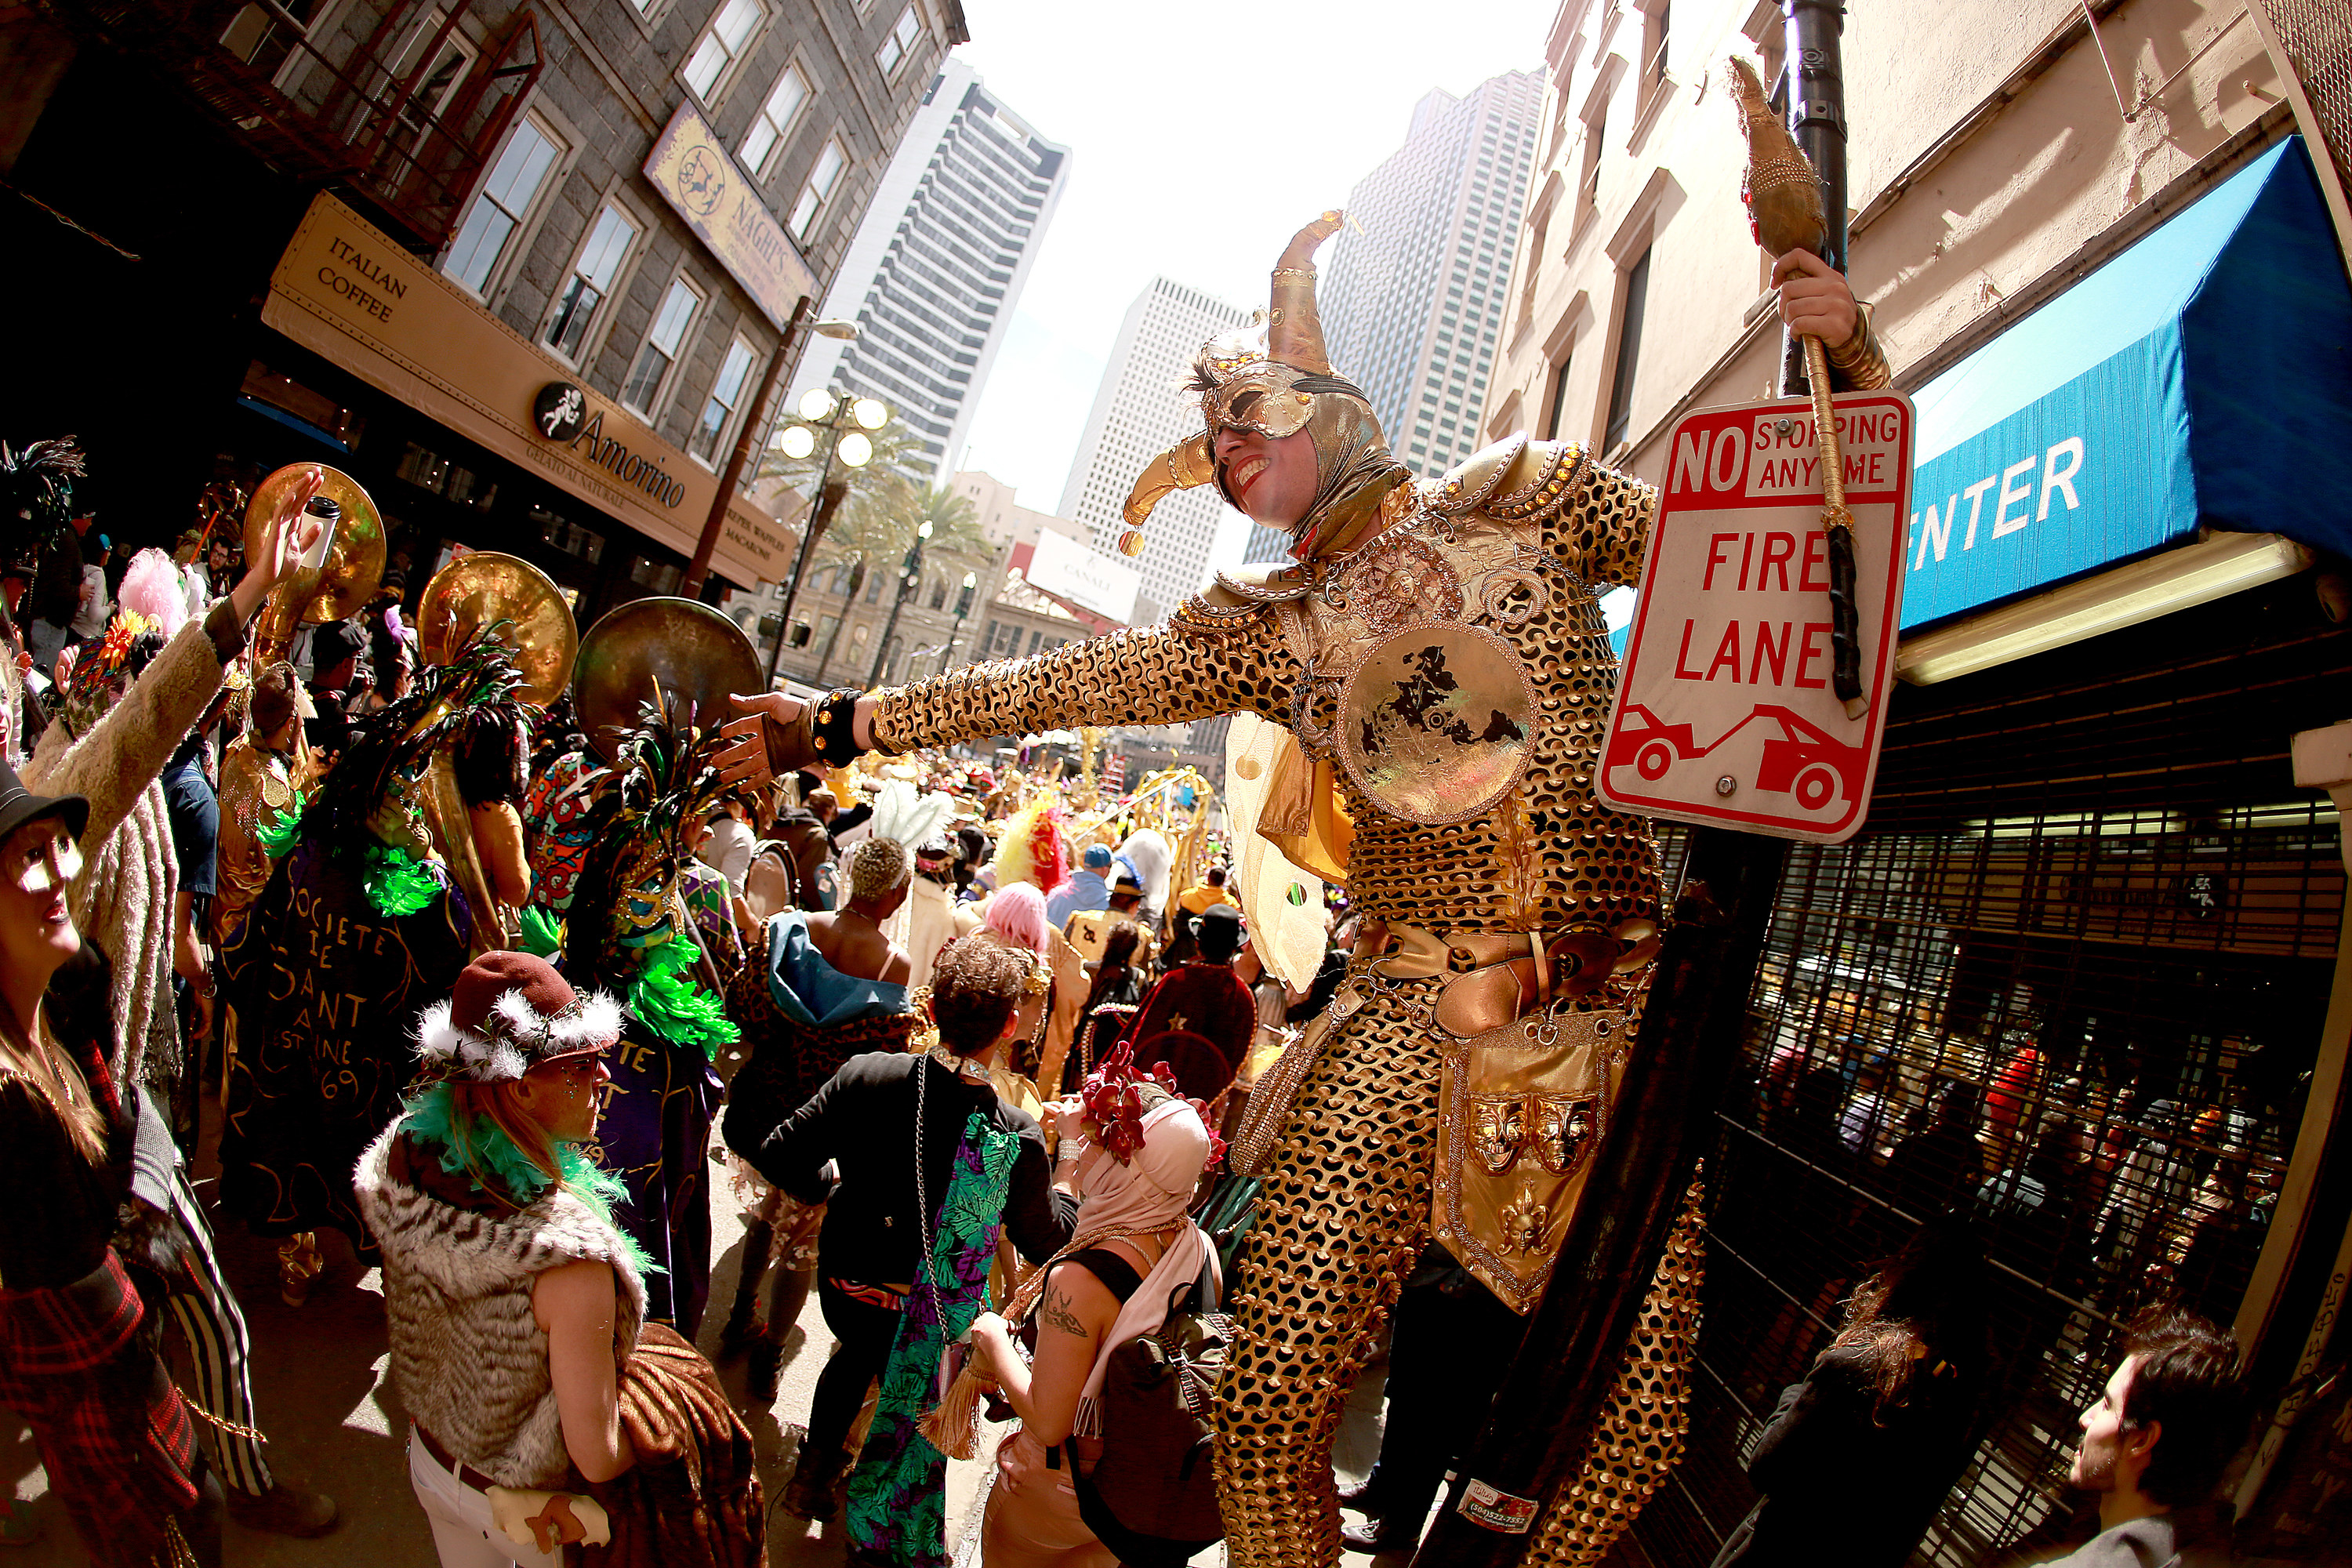 members of Krewe of Saint Anne march down the street during Mardi Gras in New Orleans